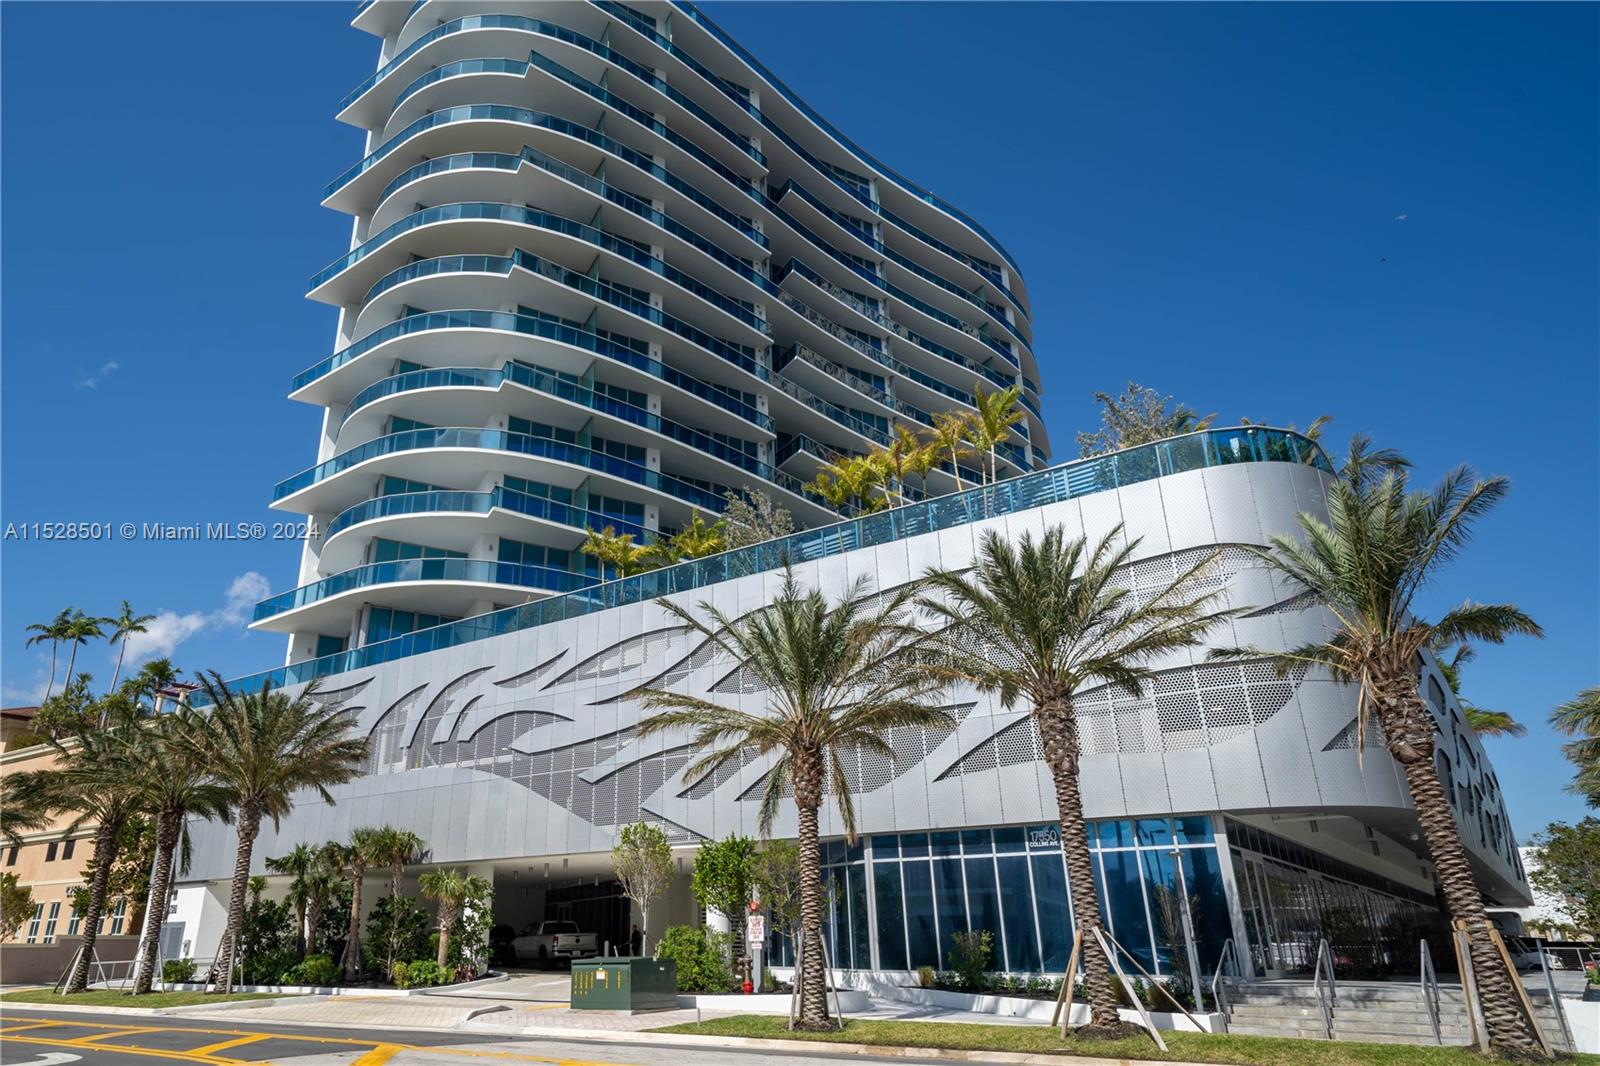 NEW NEW NEW!!!Aurora Sunny Isles is a brand-new luxury boutique building located in Sunny Isles Beach, Unit has 3 bed 3 baths!!, offering beach services and a flexible rental policy, expansive private terrace with ocean views. Additional features include 10' ceilings, a private elevator w/foyer entrance, kitchen appliances by Wolfe, and Sub-zero. Resort quality amenities include a lush pool deck, children's recreation area, Turkish hammam, and indoor/outdoor yoga spaces, gym and attended lobby. 10 minutes to Bal Harbour Shops and Aventura Mall.